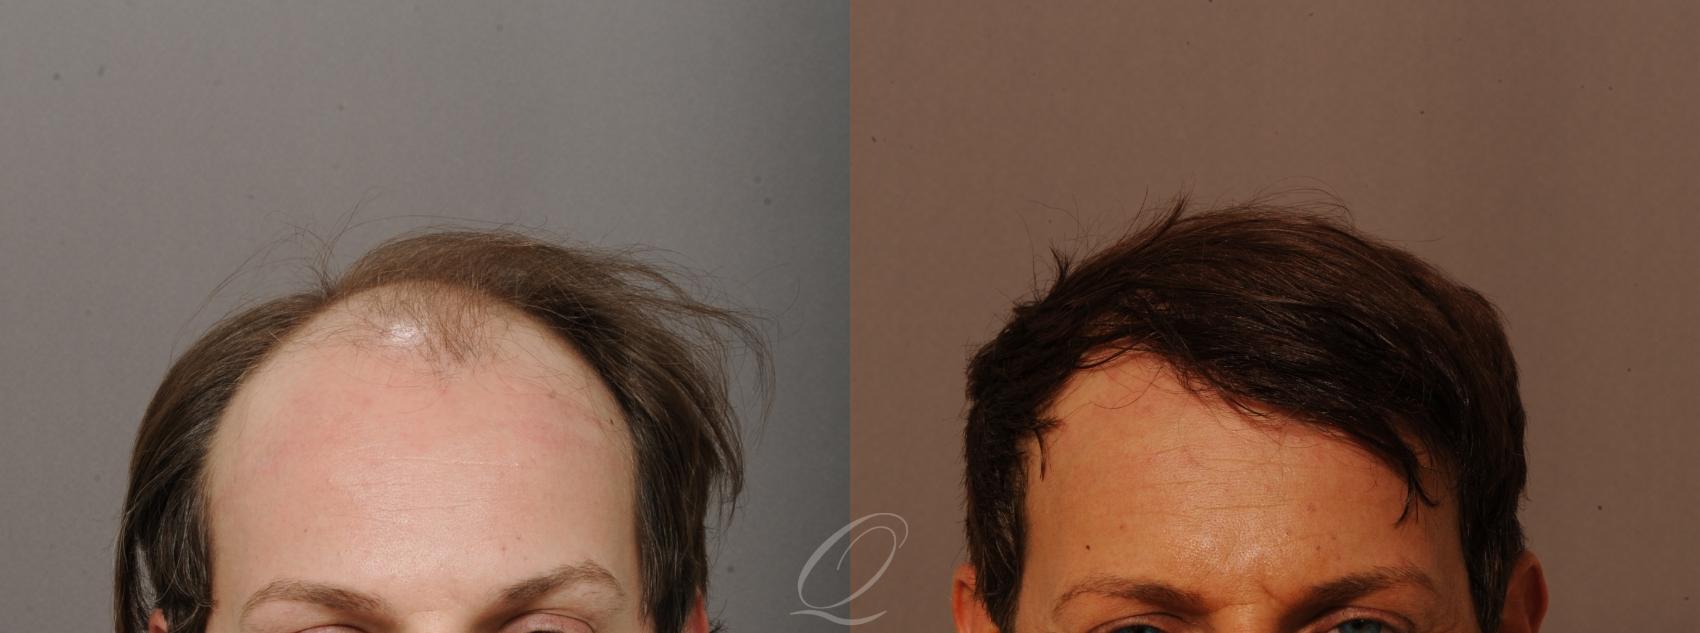 FUT Case 1001518 Before & After Front | Serving Rochester, Syracuse & Buffalo, NY | Quatela Center for Plastic Surgery